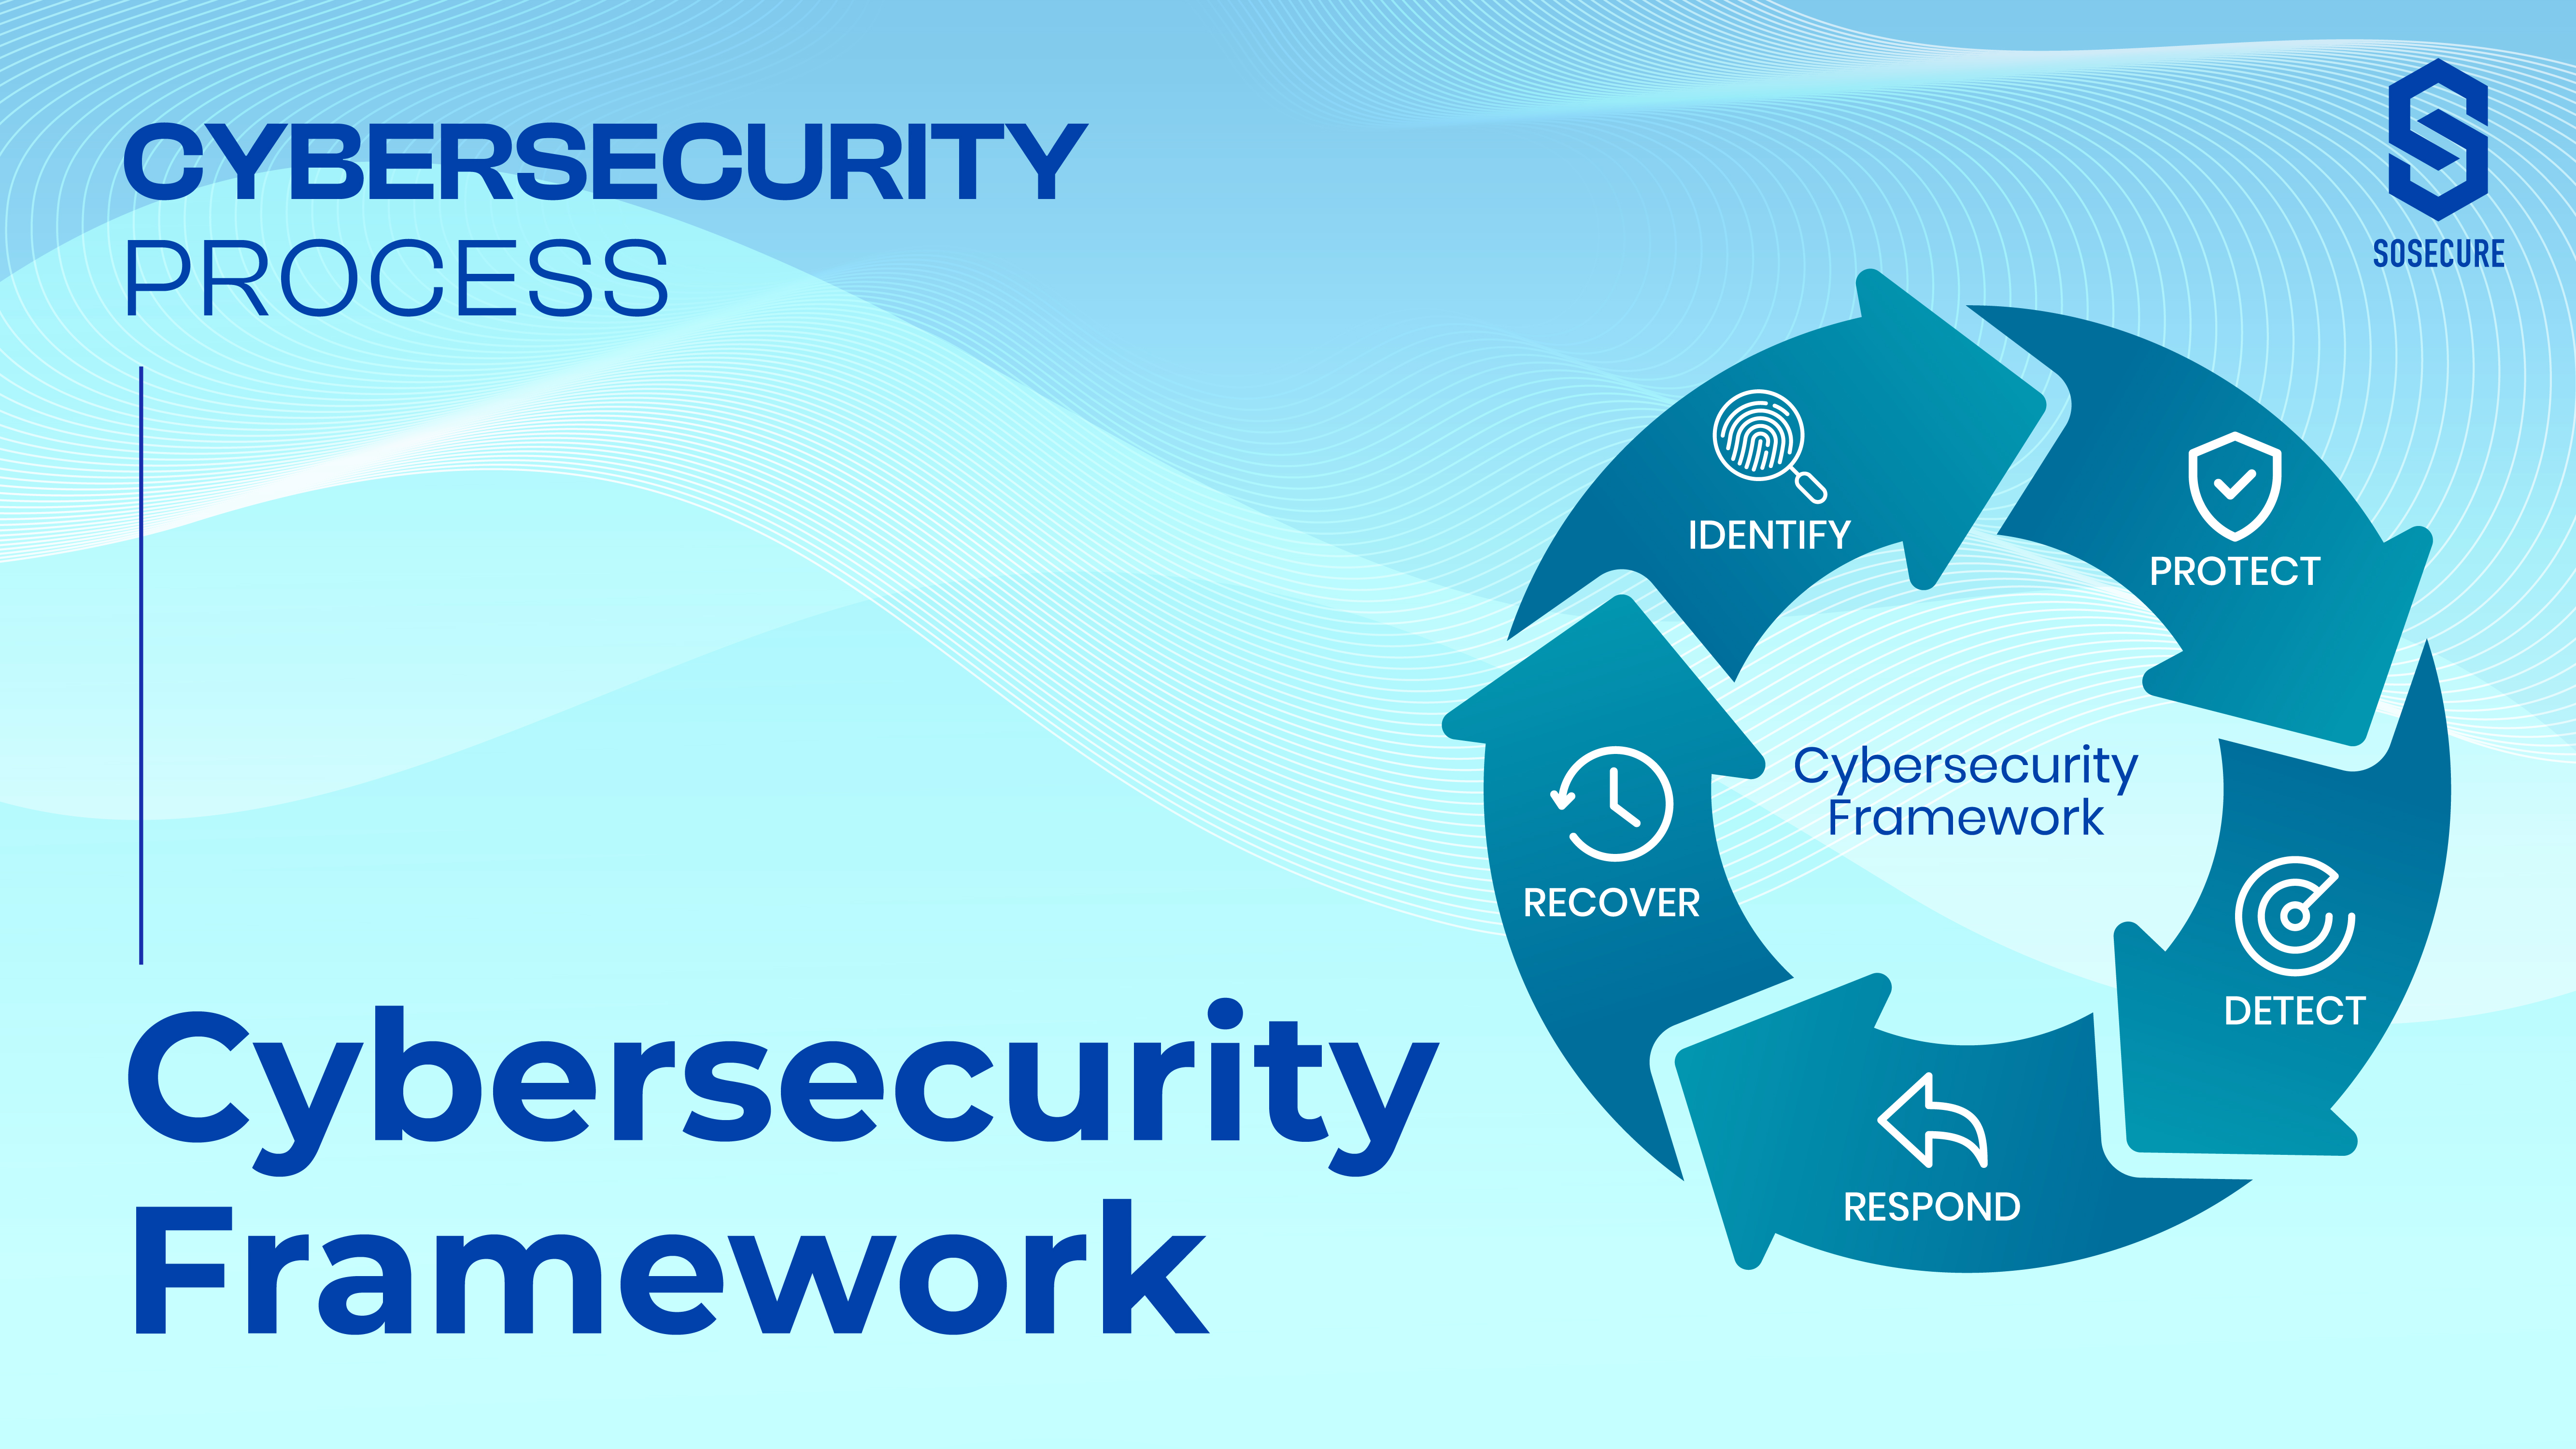 Cybersecurity Framework | SOSECURE MORE THAN SECURE